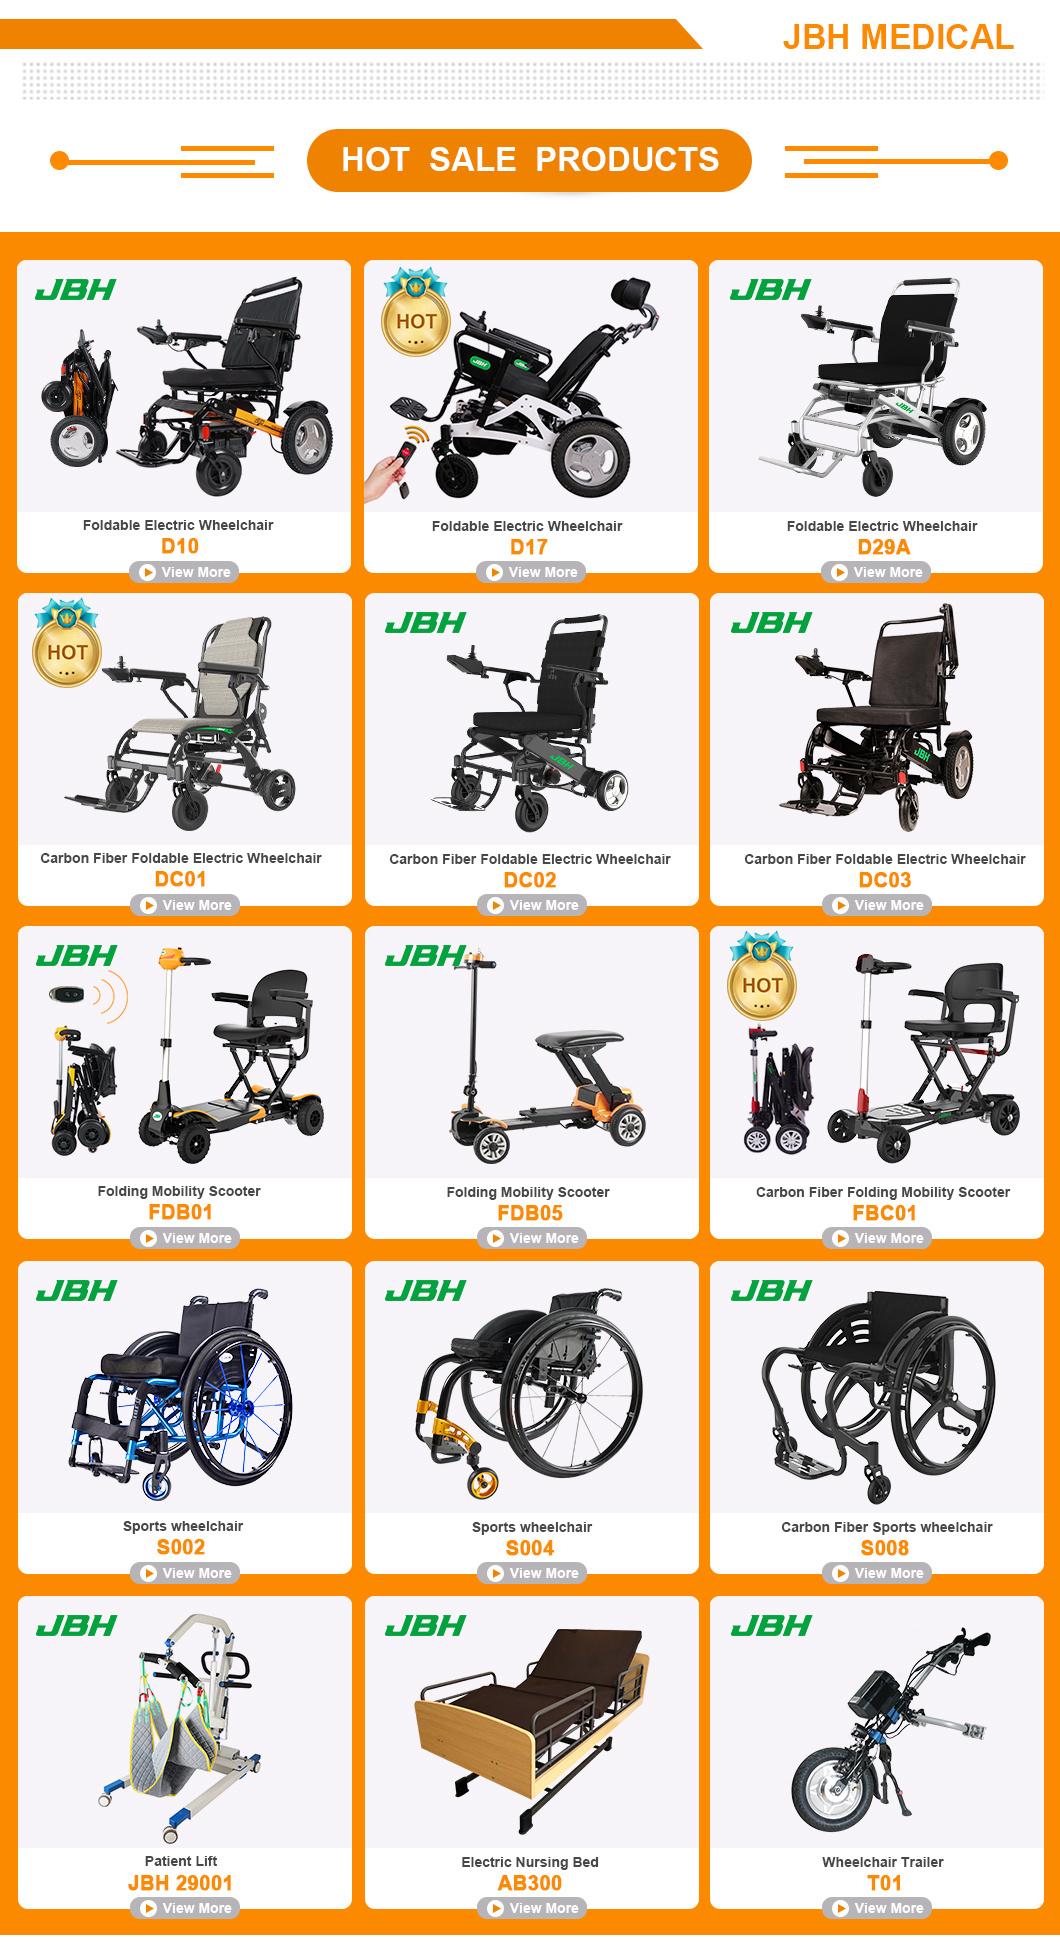 Double Spring Damping Brushless Motor Intelligent Portable Electric Wheelchair